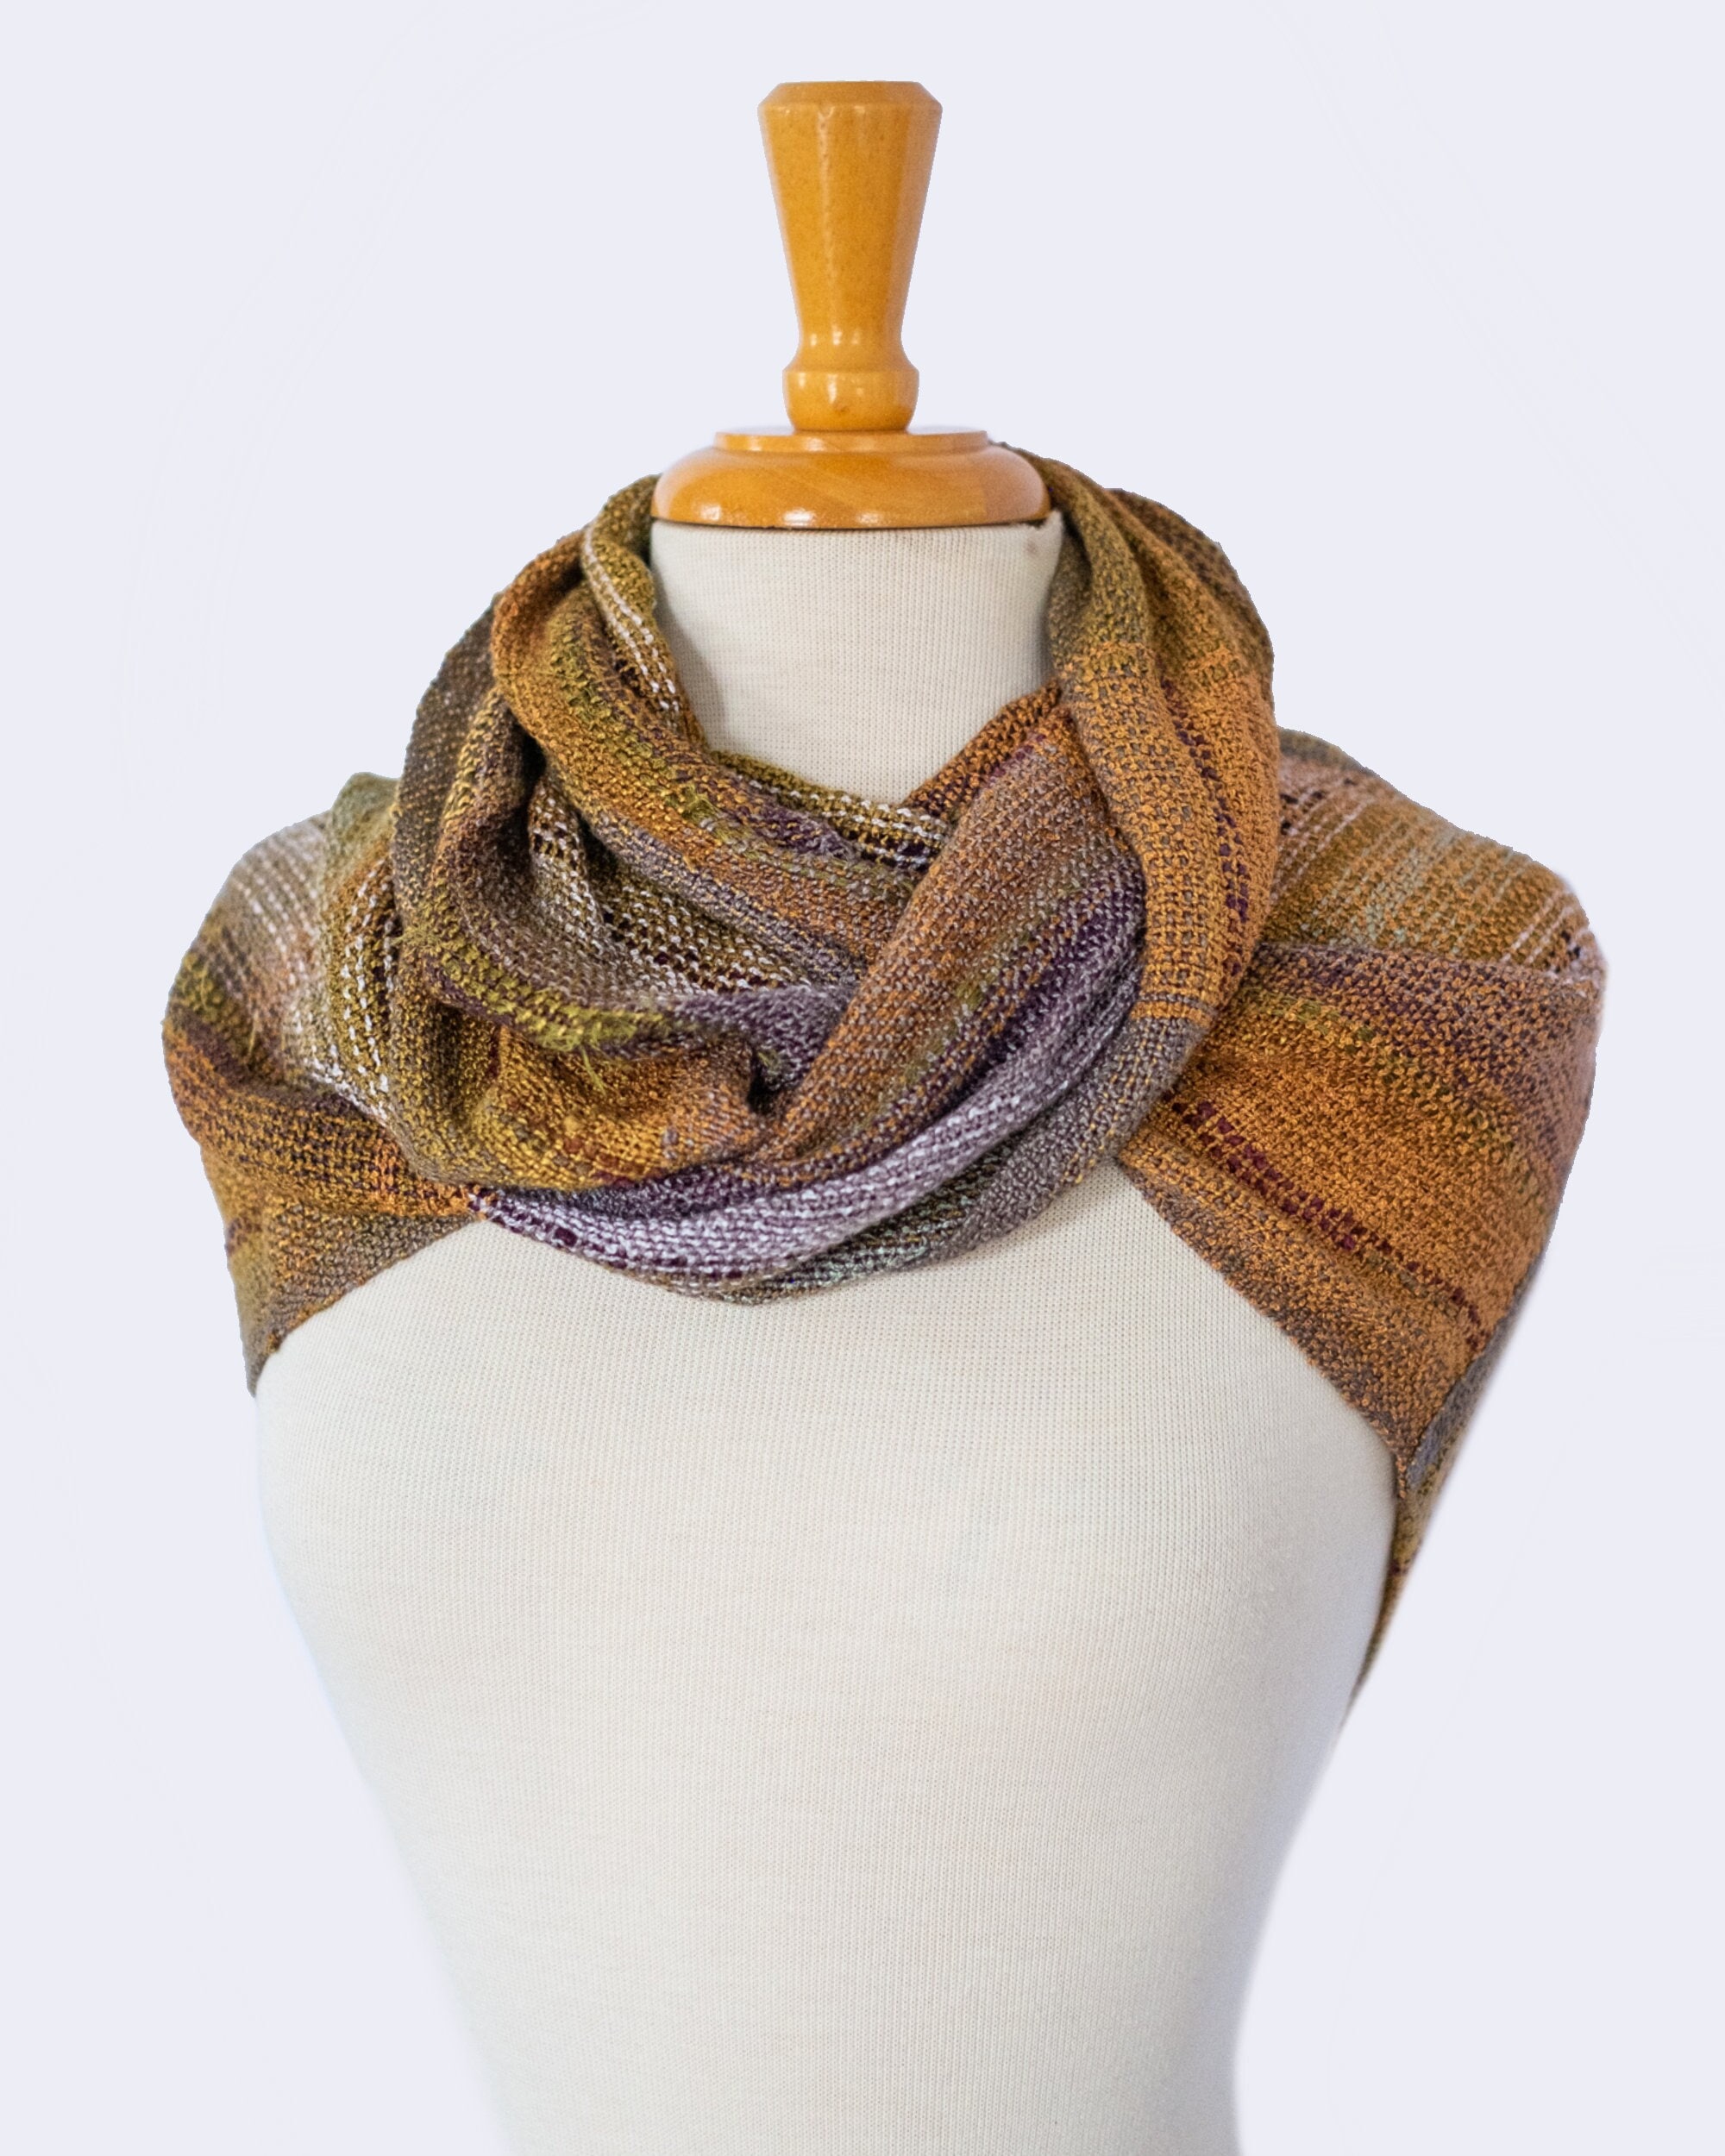 Handwoven Mobius Shawl With Ribbon Accents. Lavender and Burnt Sienna ...